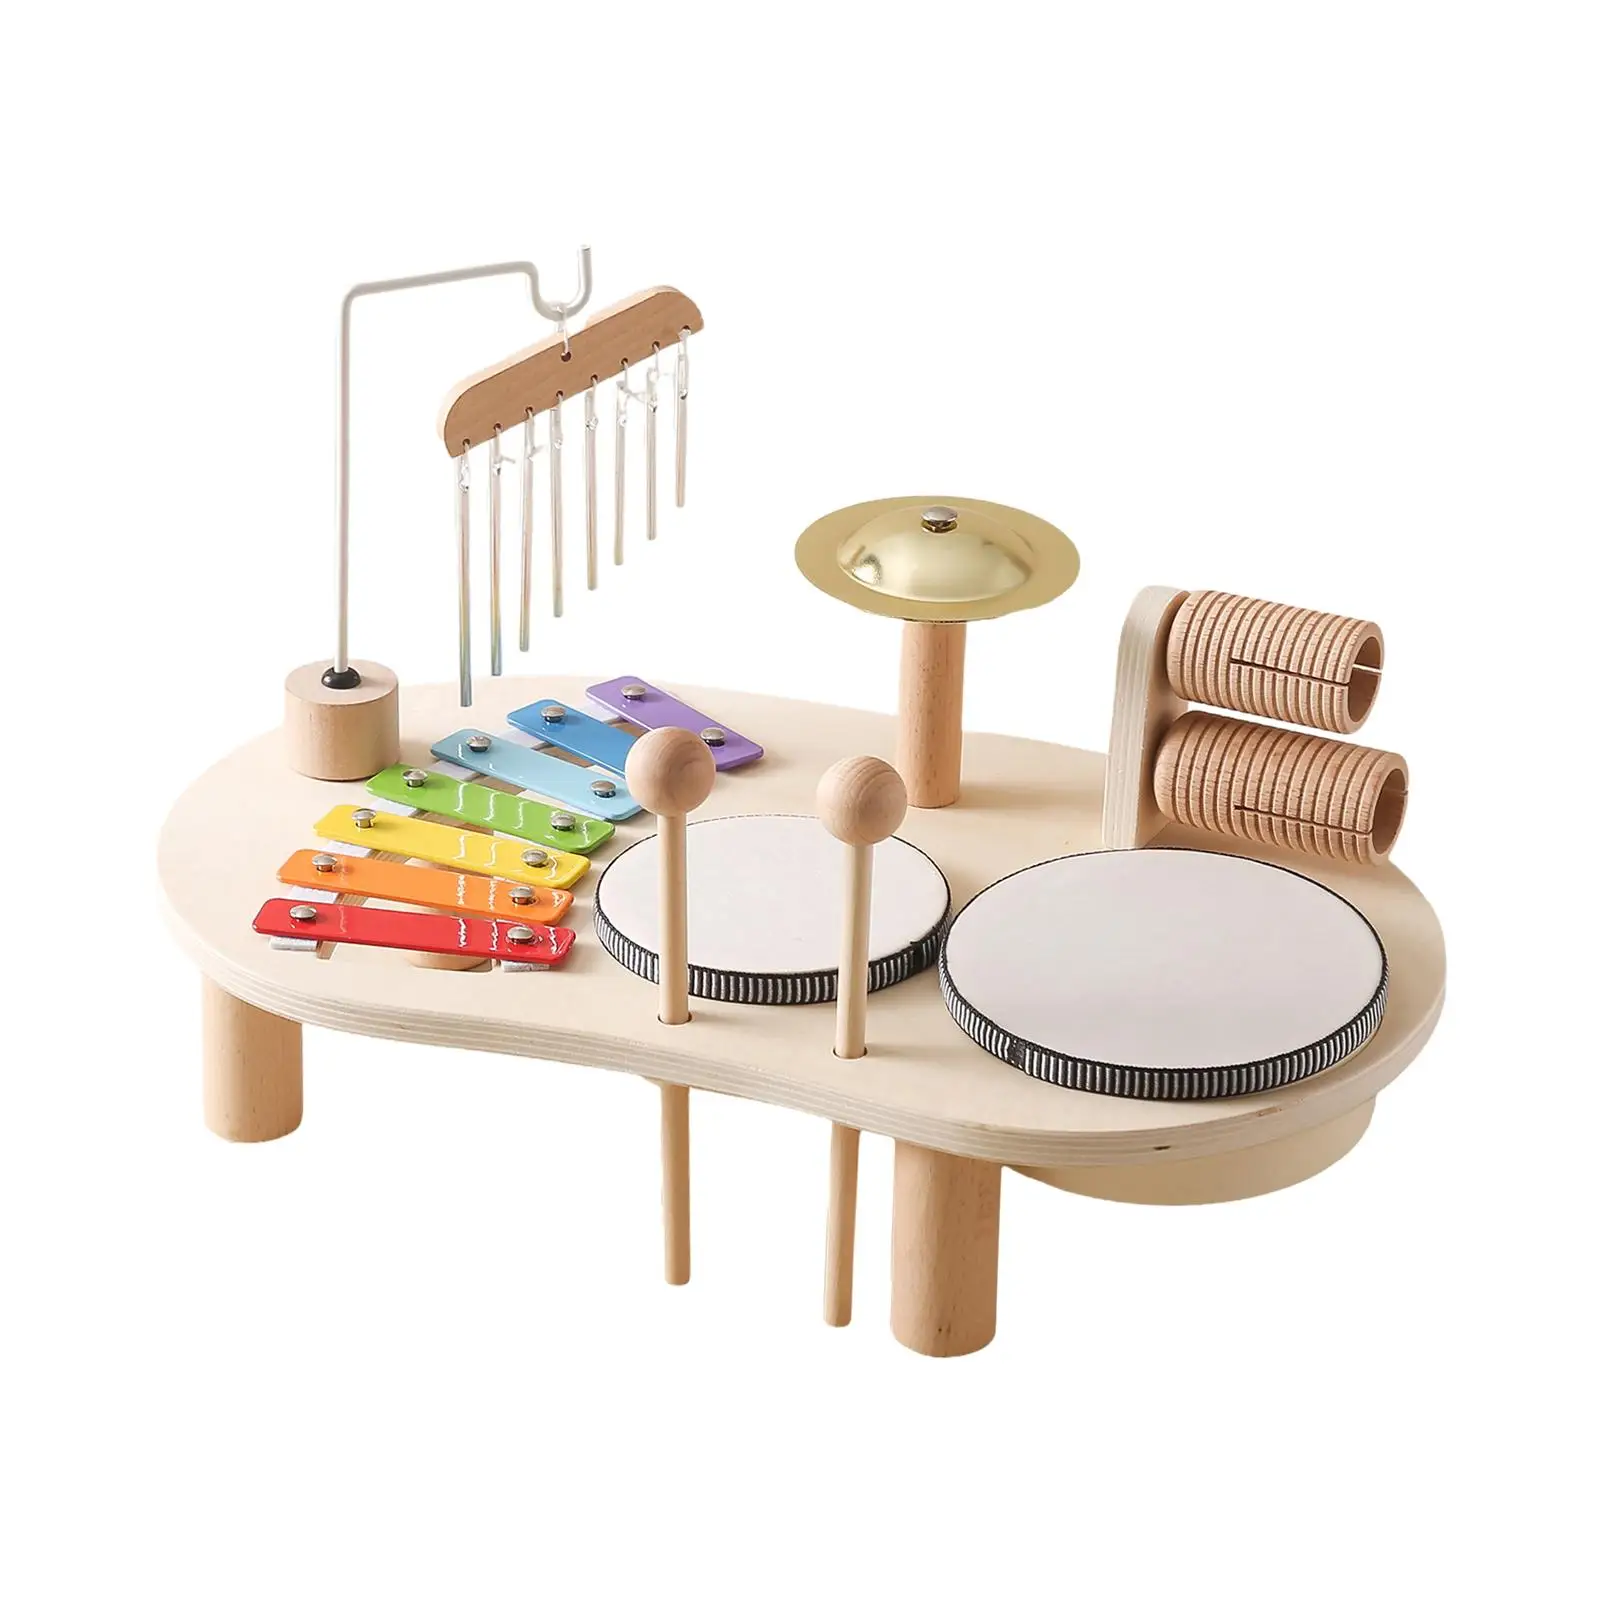 Kids Drum Set Hand Eye Coordination Developmental Wooden Musical Kits for Kids Ages 3 4 5 6 Years Old Boy Girl Holiday Gifts